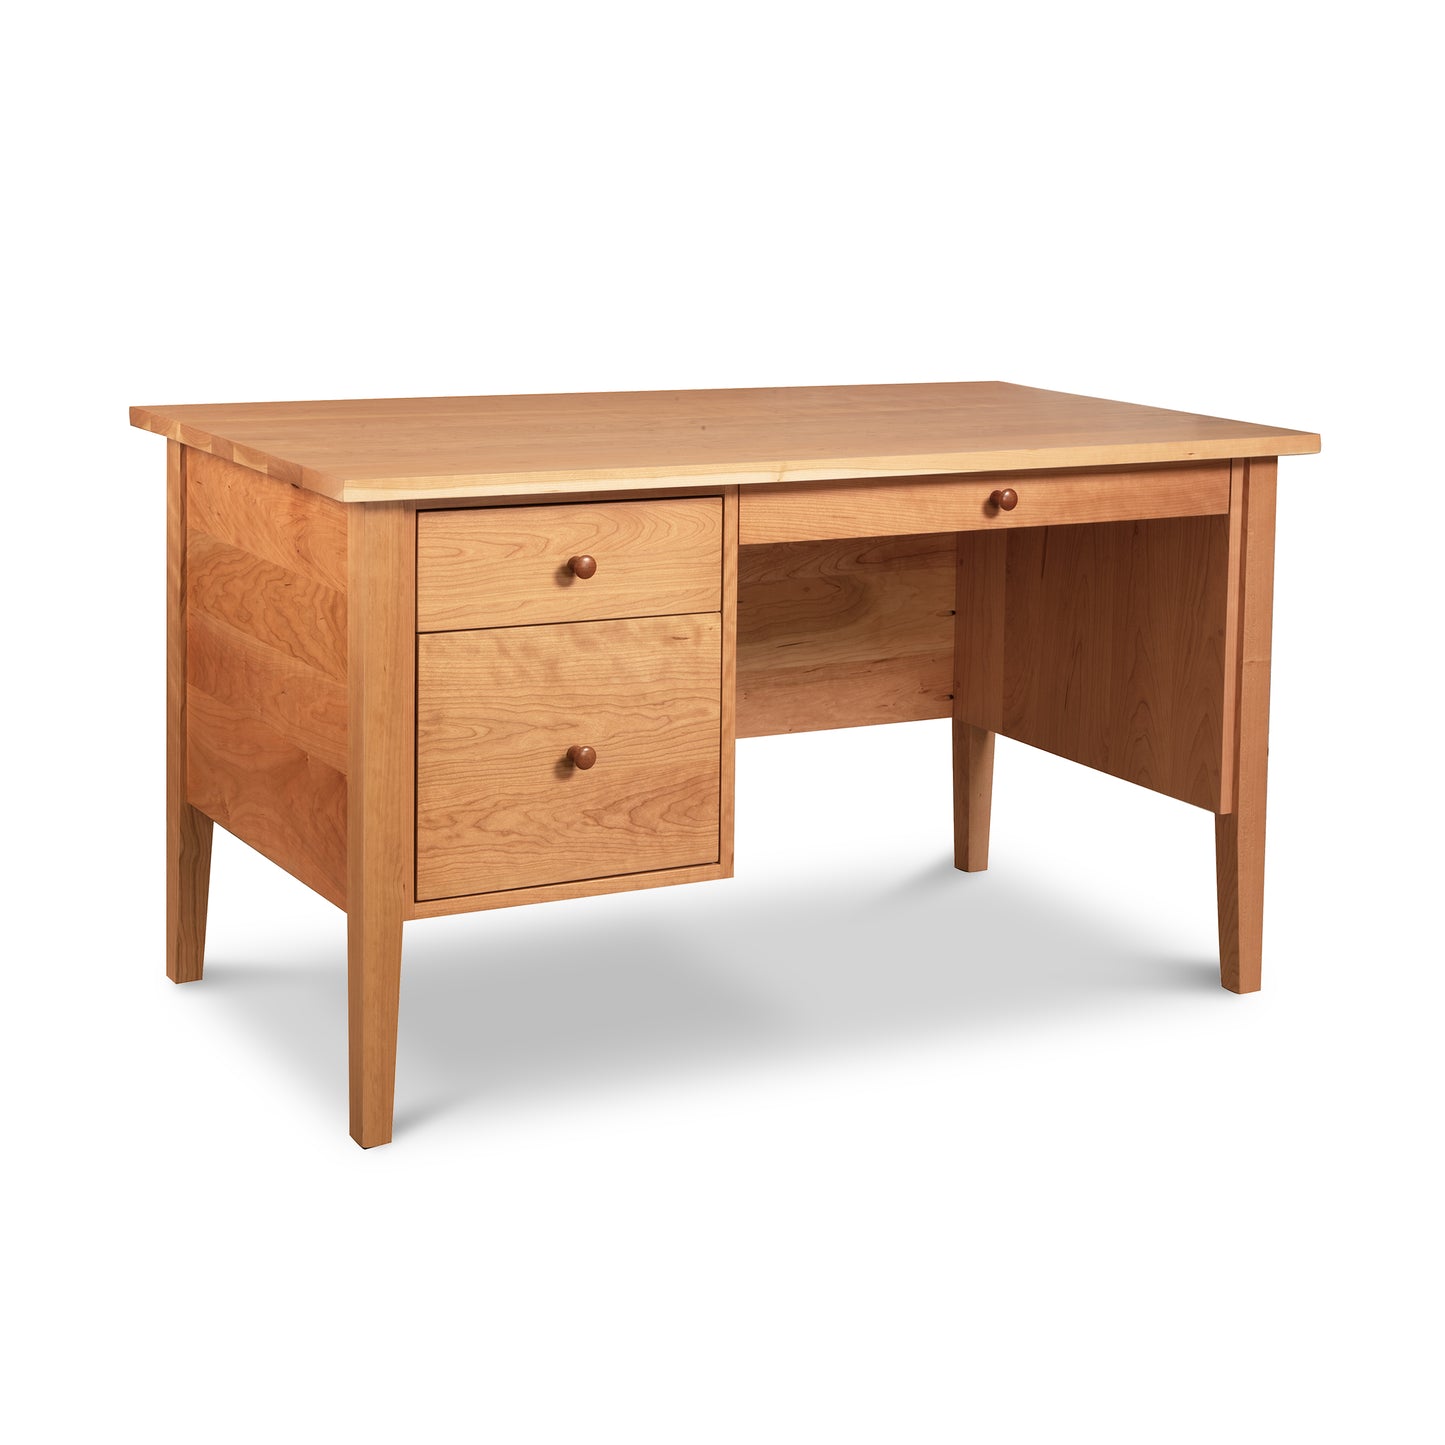 A Small Wood Executive Desk with two drawers for storage, made of solid wood from Lyndon Furniture.